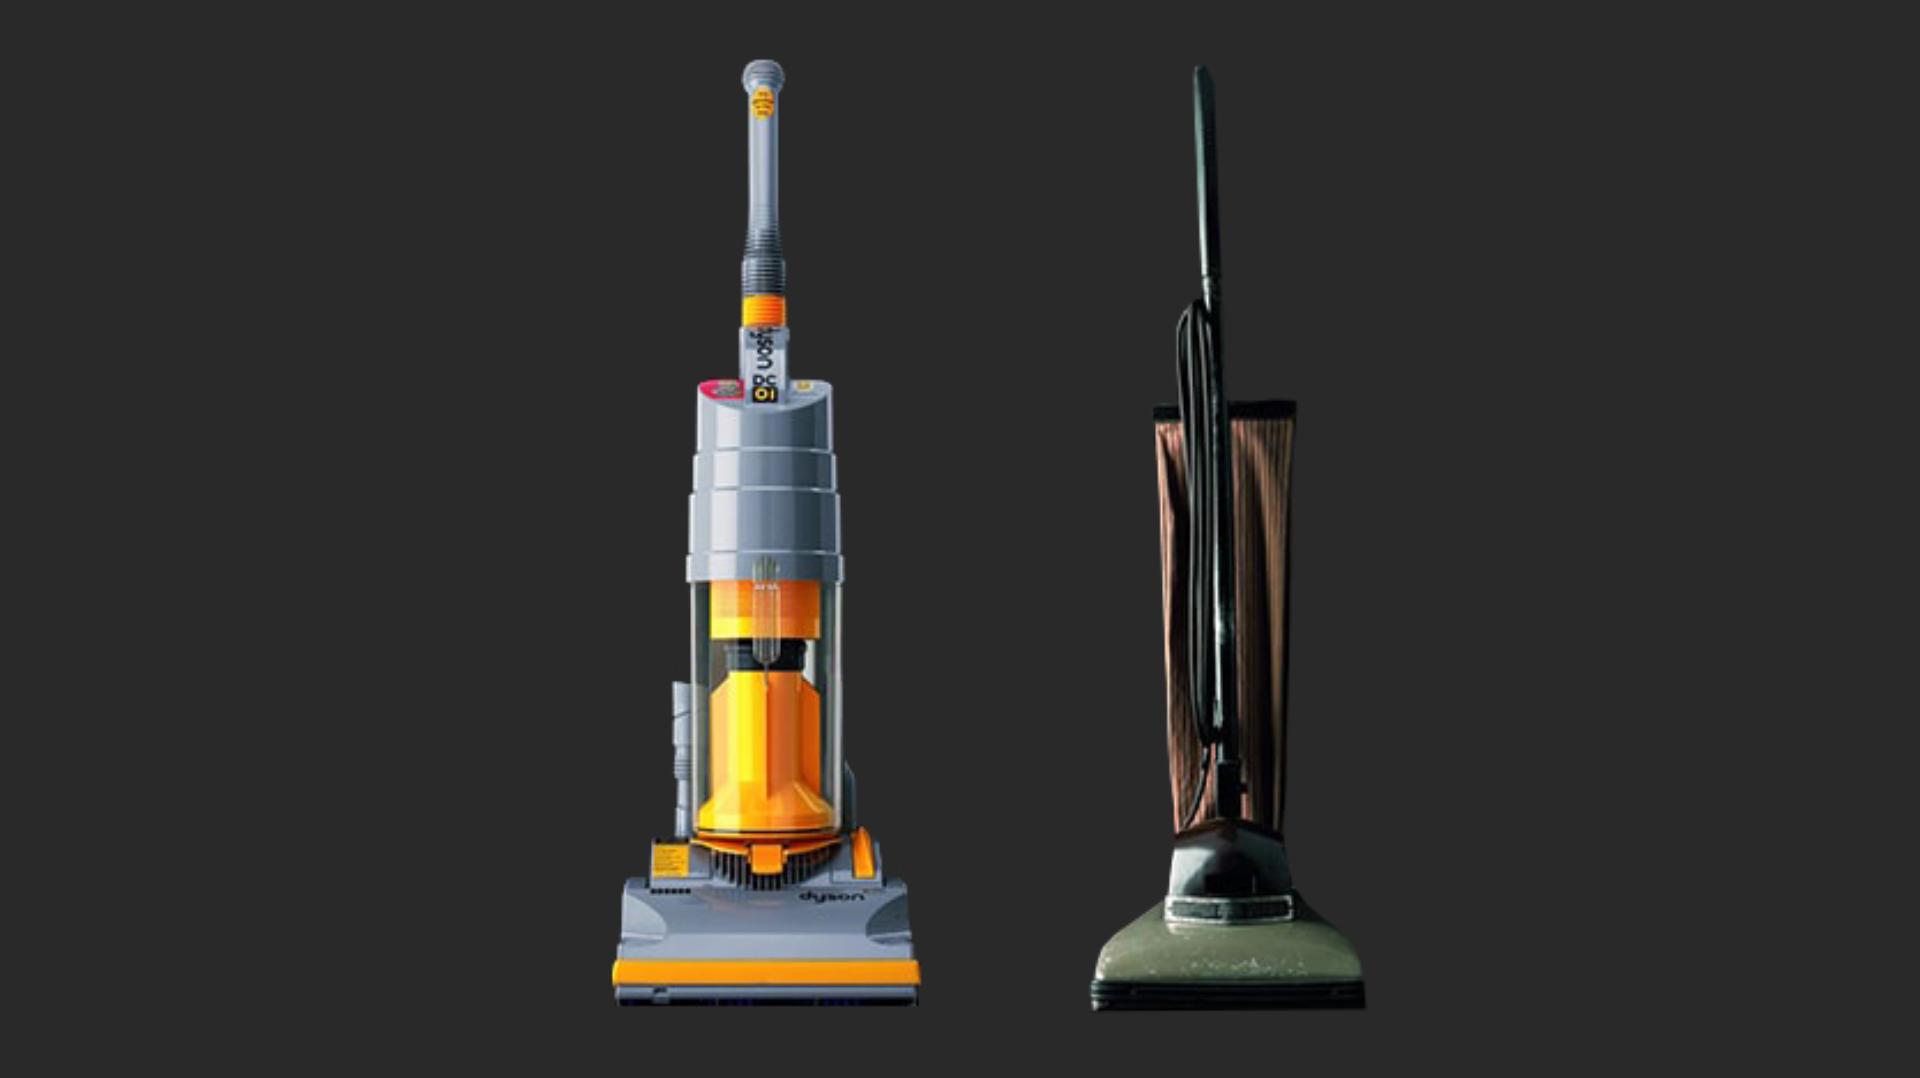 DC01 and a competitor model of vacuum machine